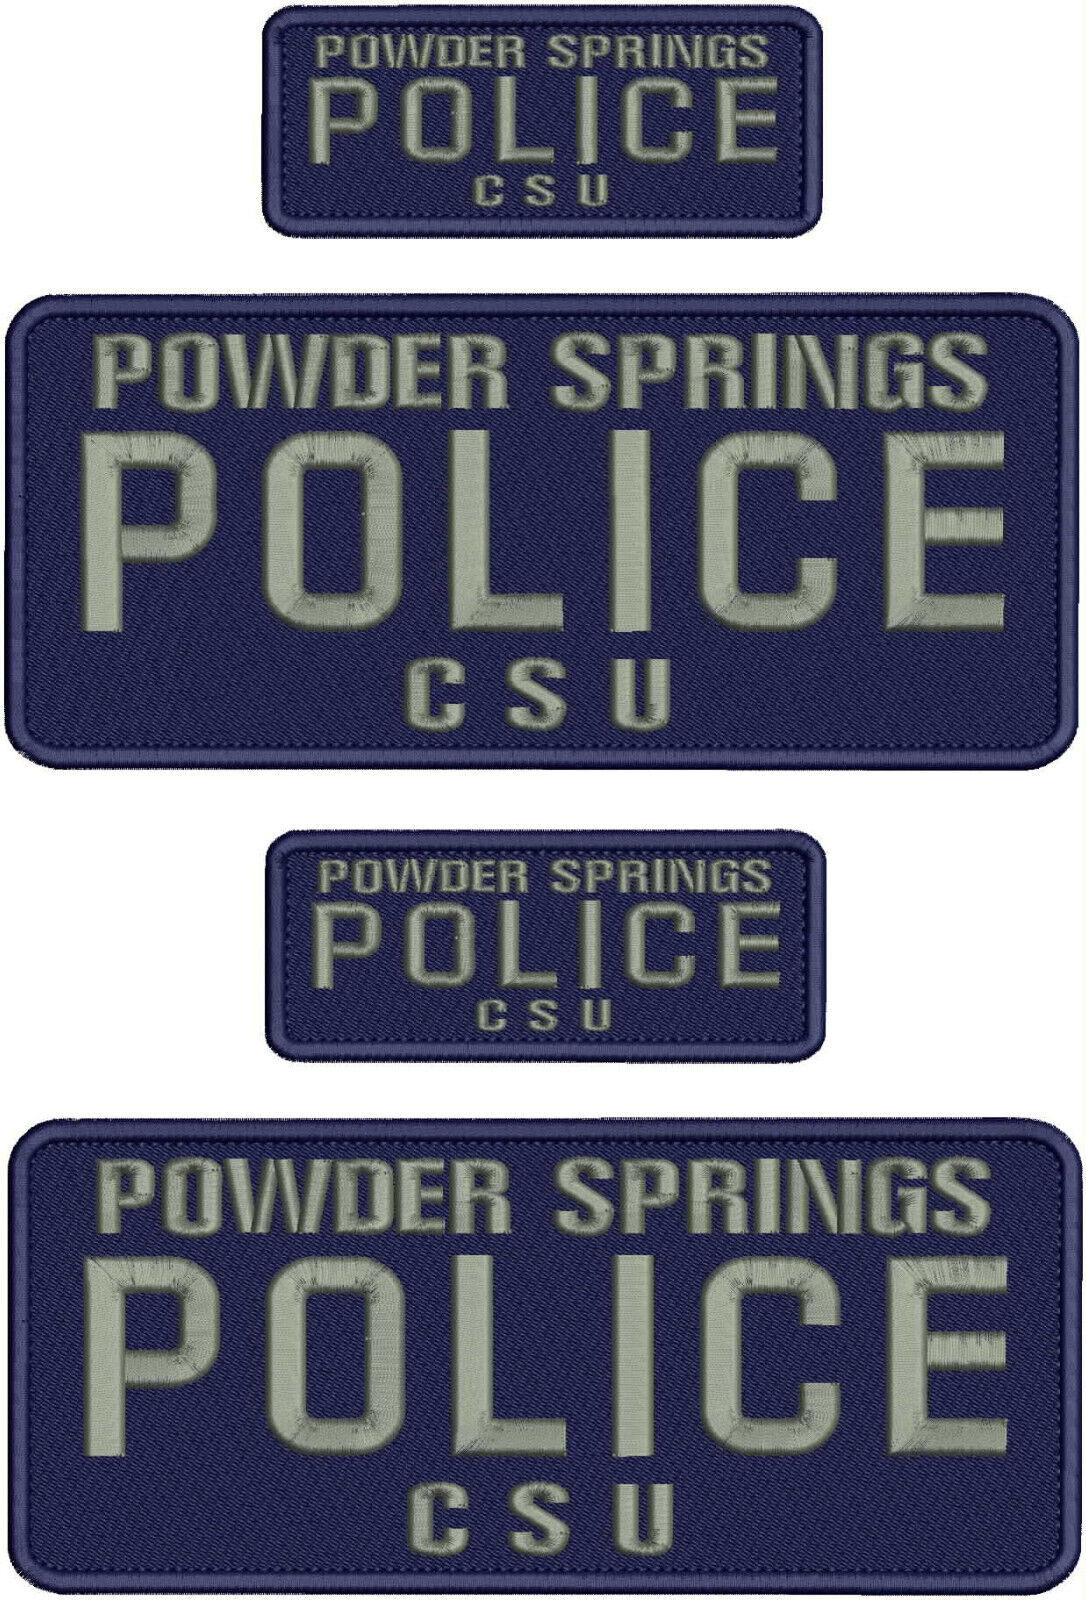 POWDER SPRINGS POLICE CSU 4 EMB PATCHES 4X10 &2X5 VELCR@ ON GRAY ON NAVY BLUE